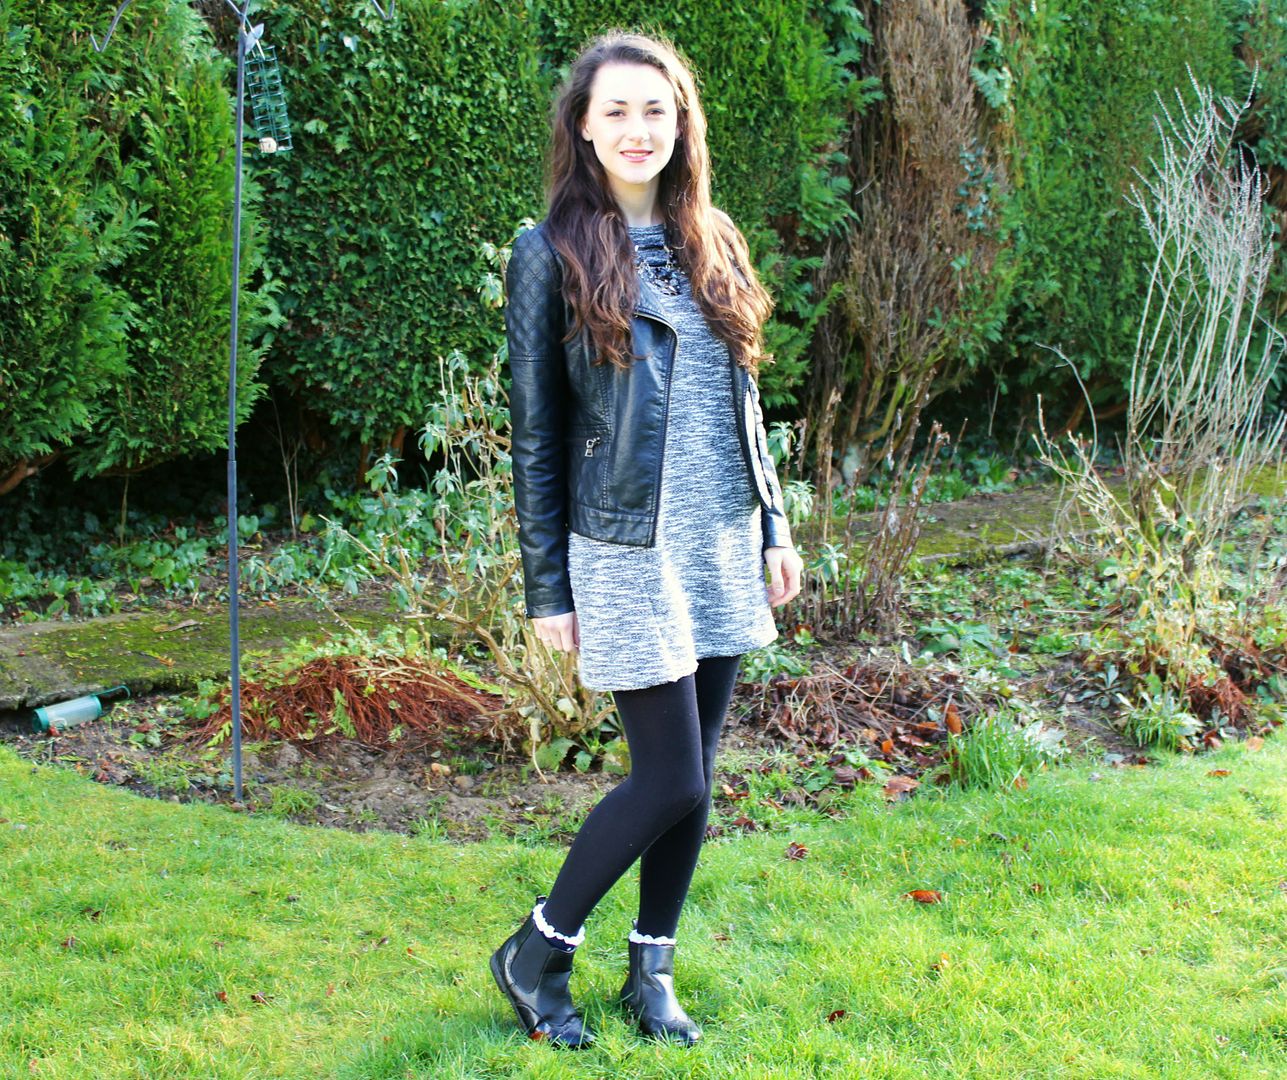 Winter Fashion Outfit Of The Day Casual Monochrome Miss Selfridge Oasis Primark Belle-Amie UK Beauty Fashion Lifestyle Blog